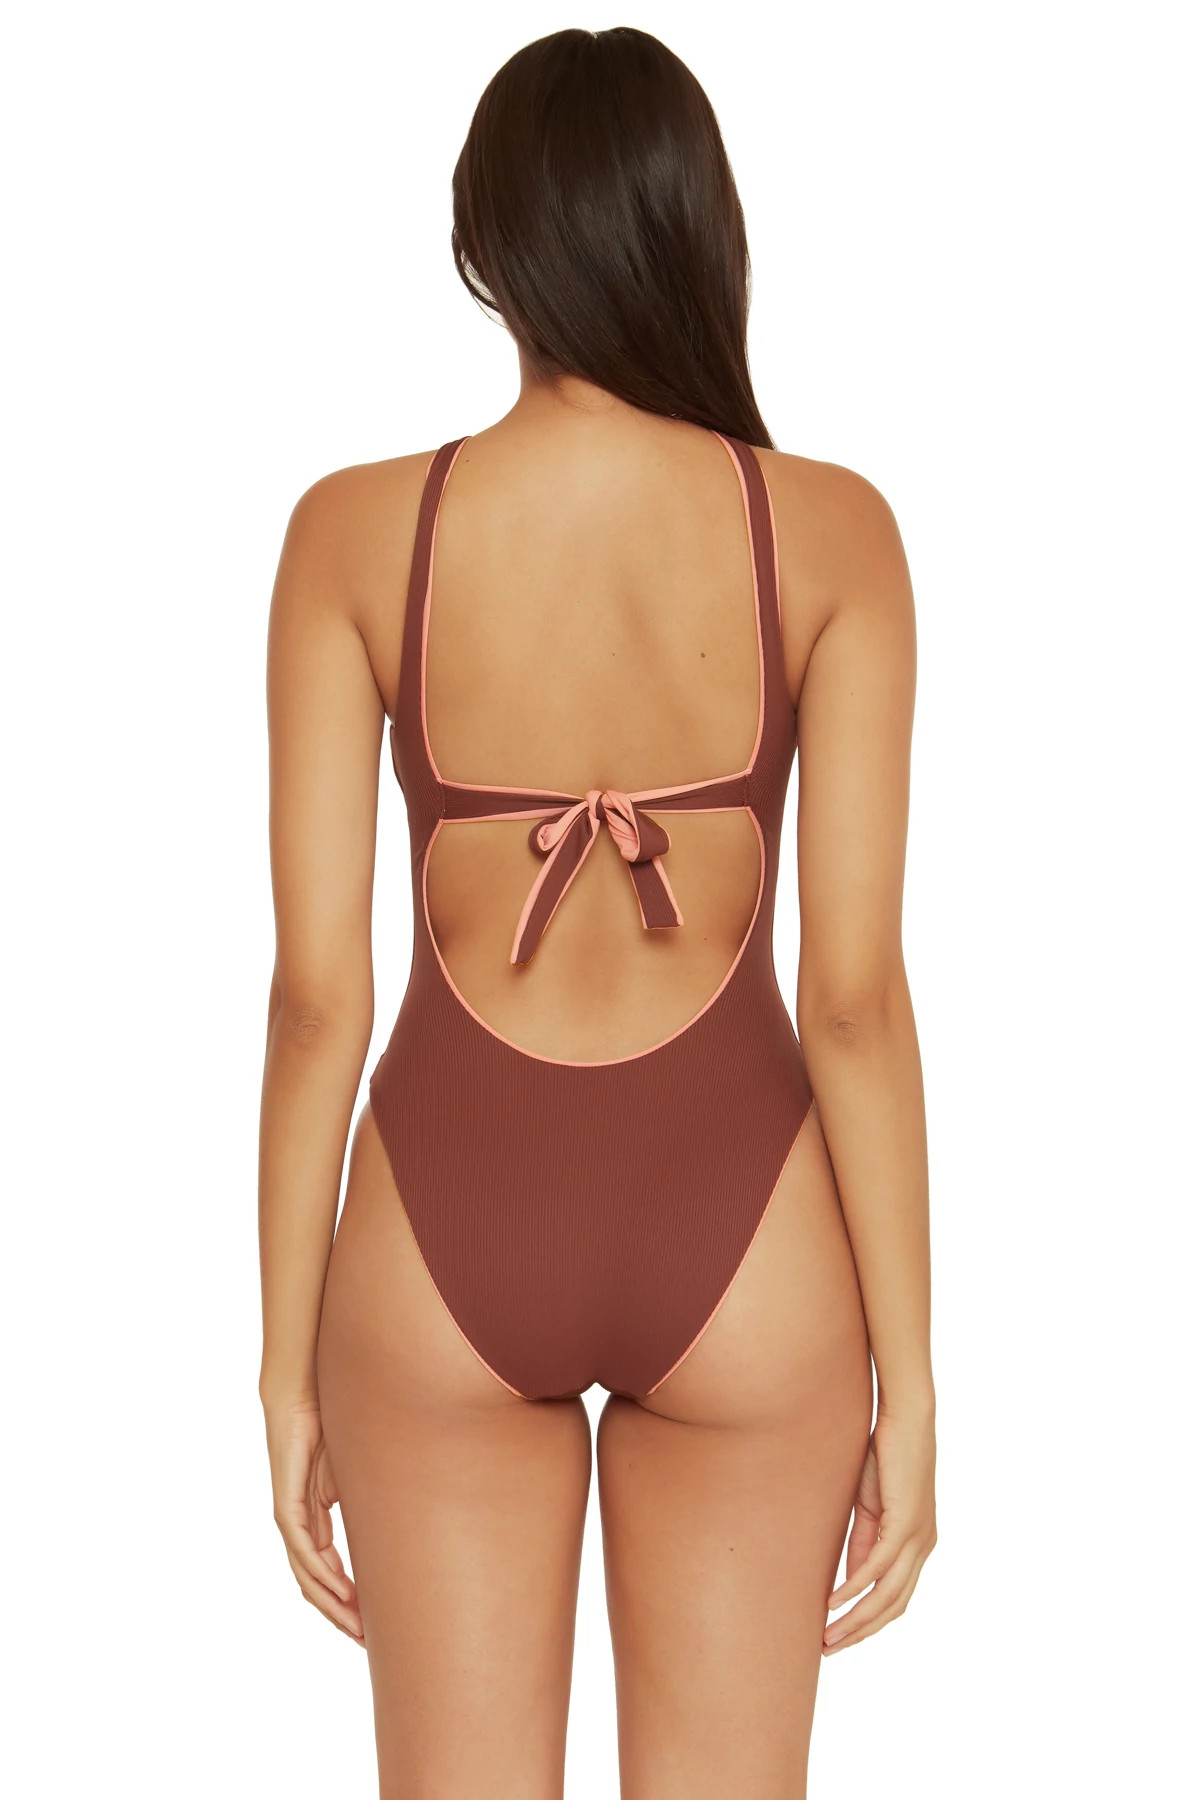 COCONUT Mikayla High Neck One Piece Swimsuit image number 2